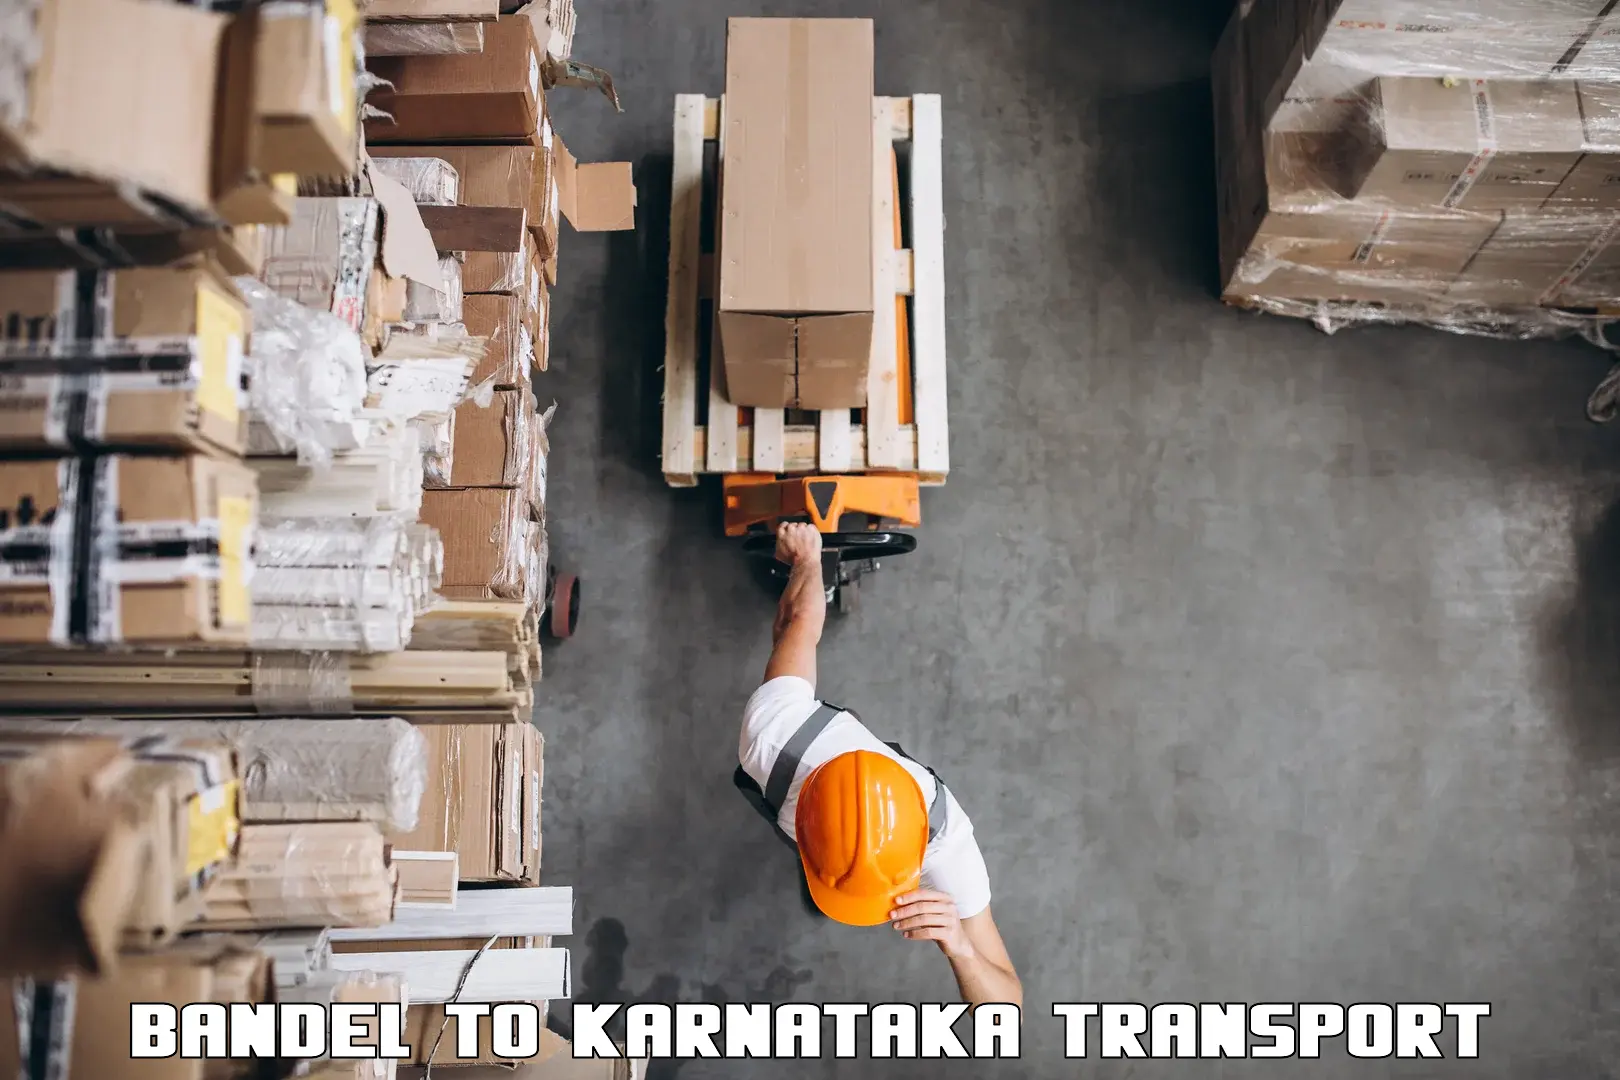 Truck transport companies in India Bandel to Mangalore Port